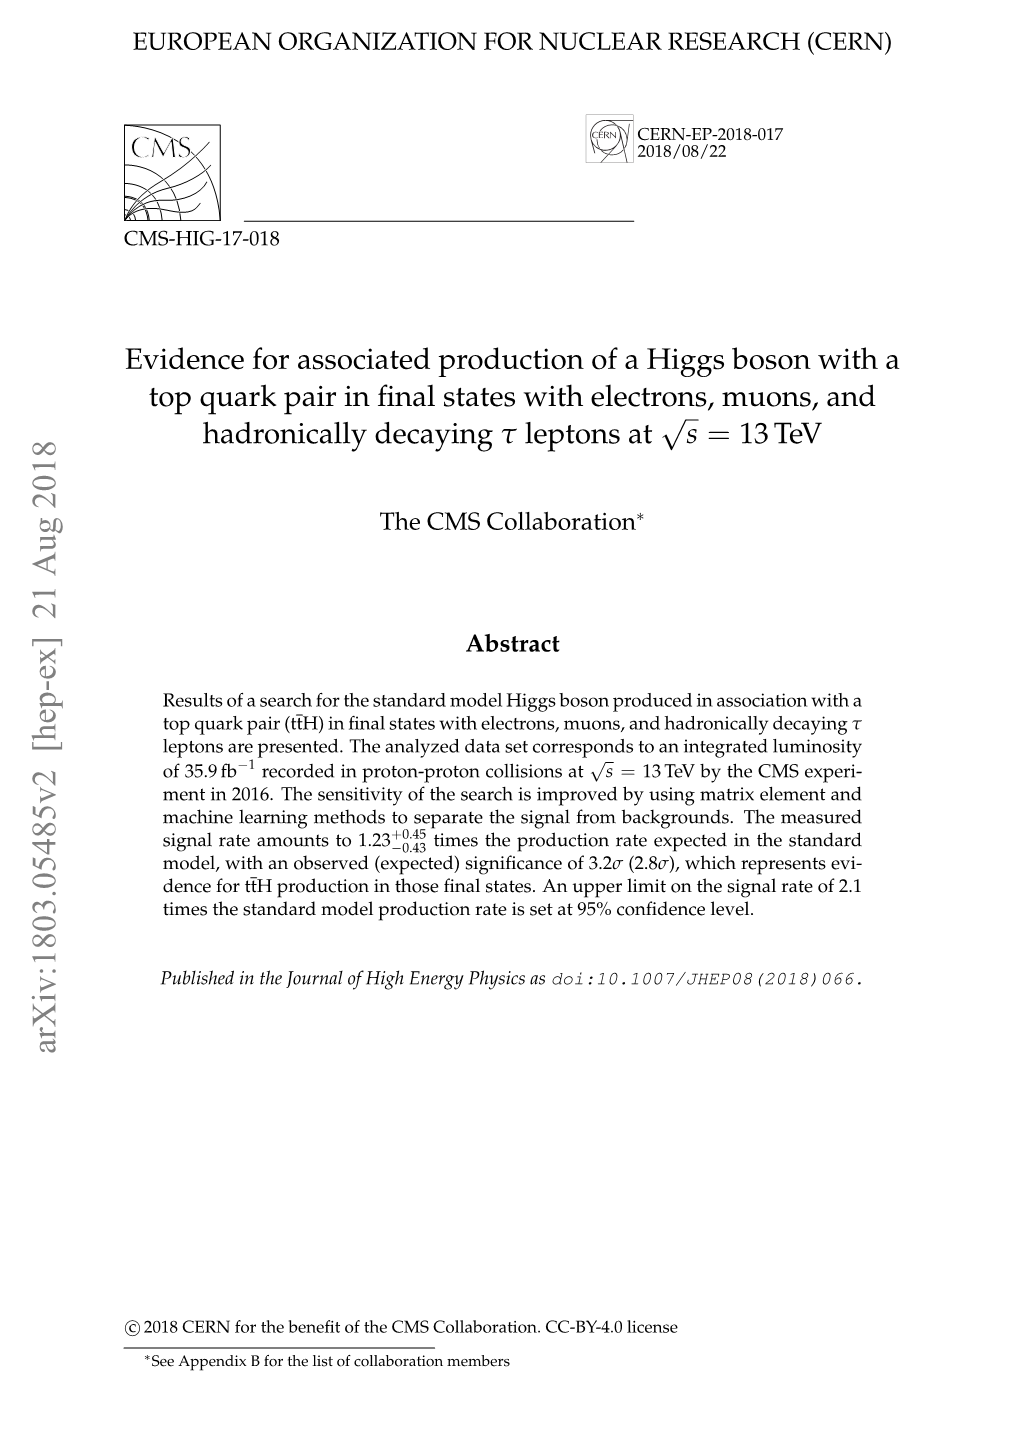 Evidence for Associated Production of a Higgs Boson with a Top Quark Pair in ﬁnal States with Electrons, Muons, and Hadronically Decaying Τ Leptons at √S = 13 Tev